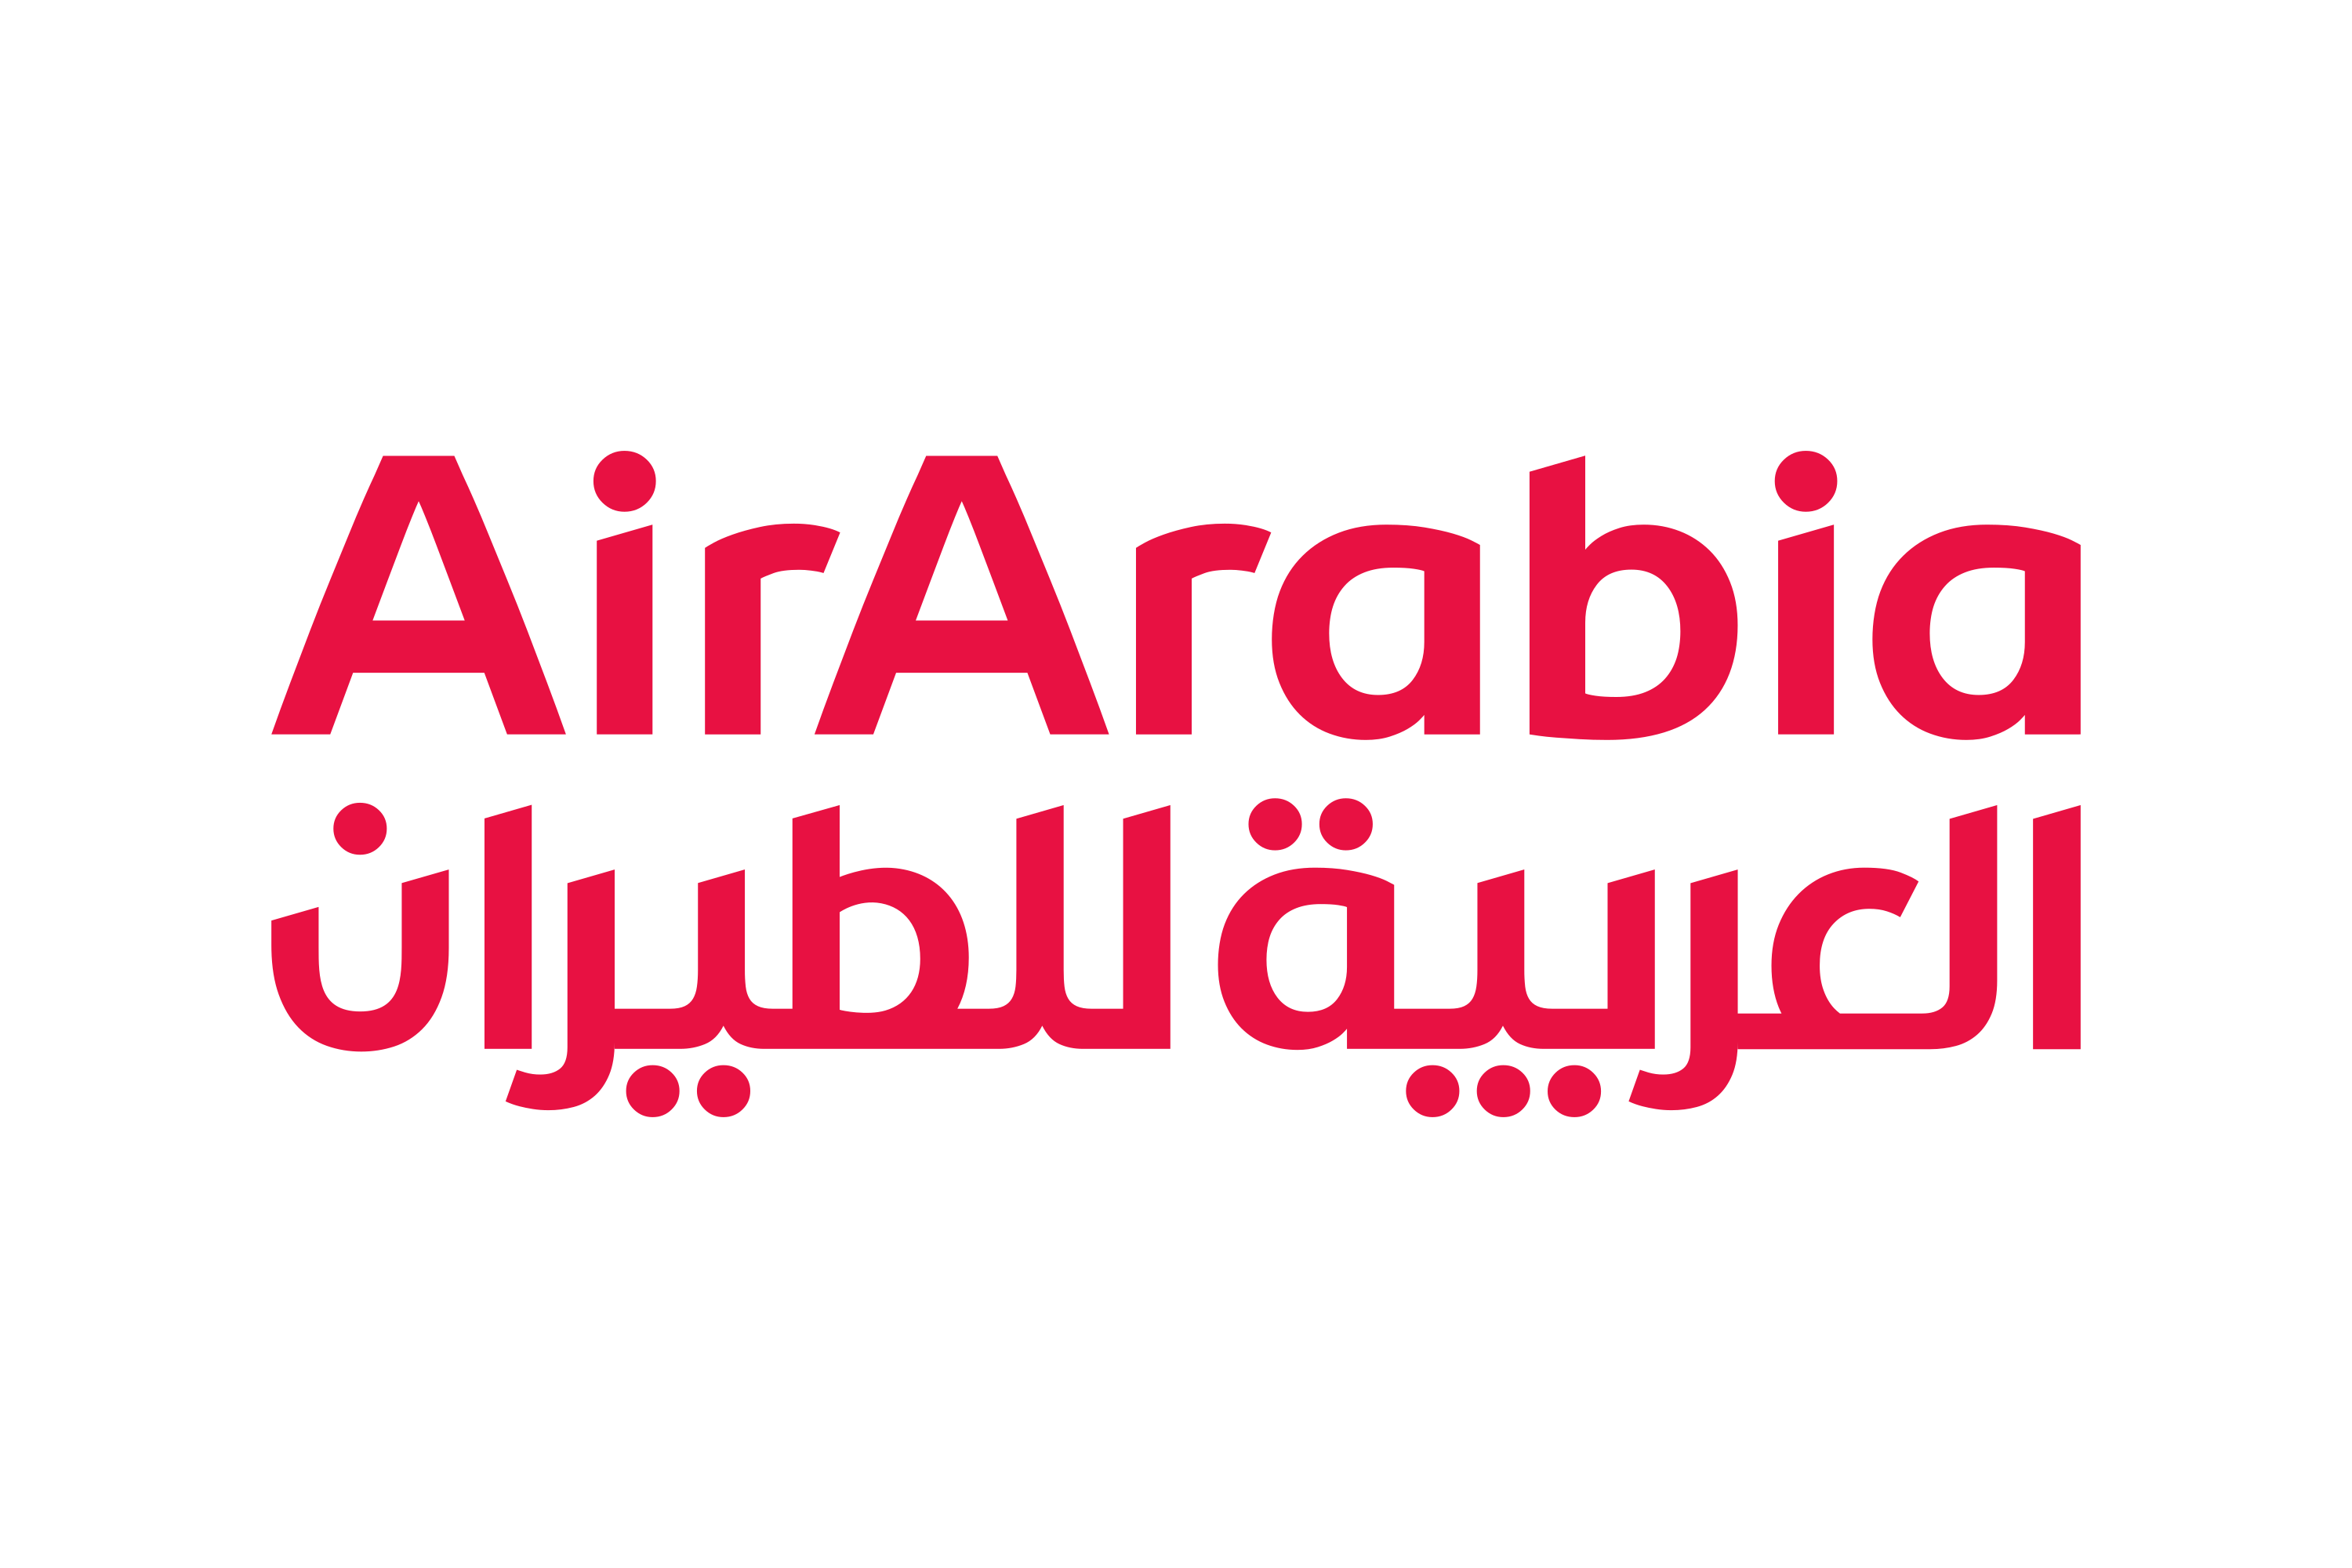 Air Arabia announced the launch of new service to Phuket, Thailand's most popular tourist destination